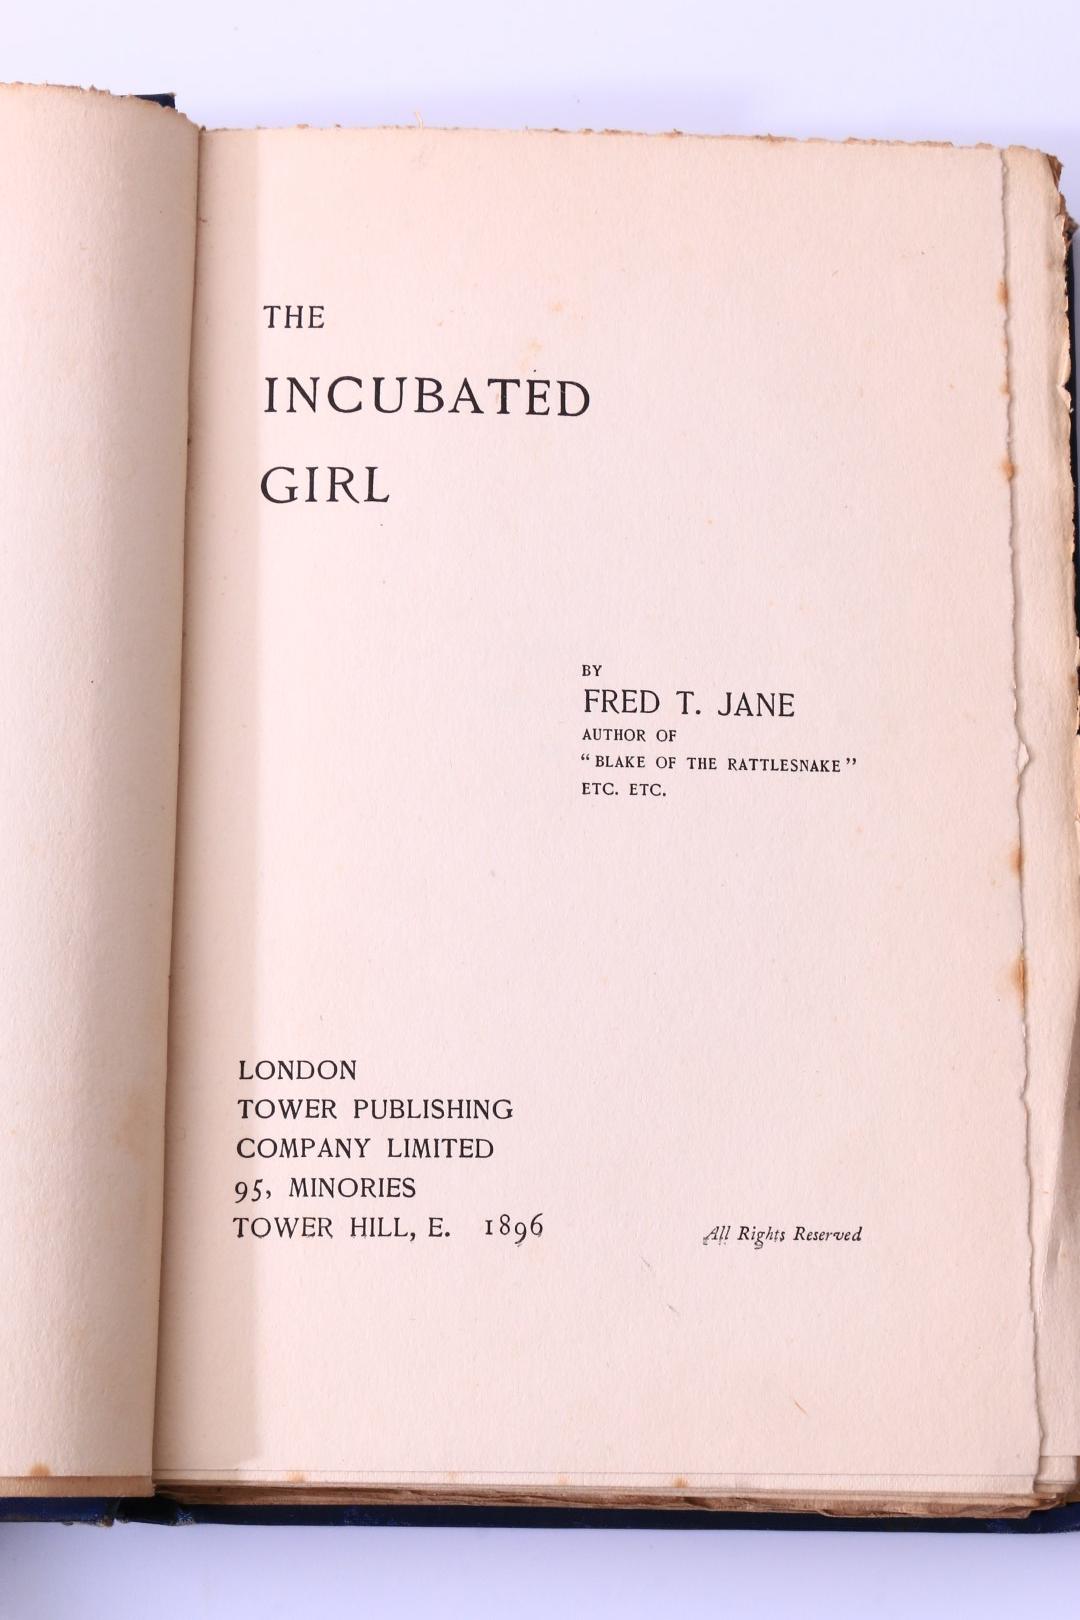 Fred T. Jane - The Incubated Girl - Tower Publishing co., 1896, First Edition.